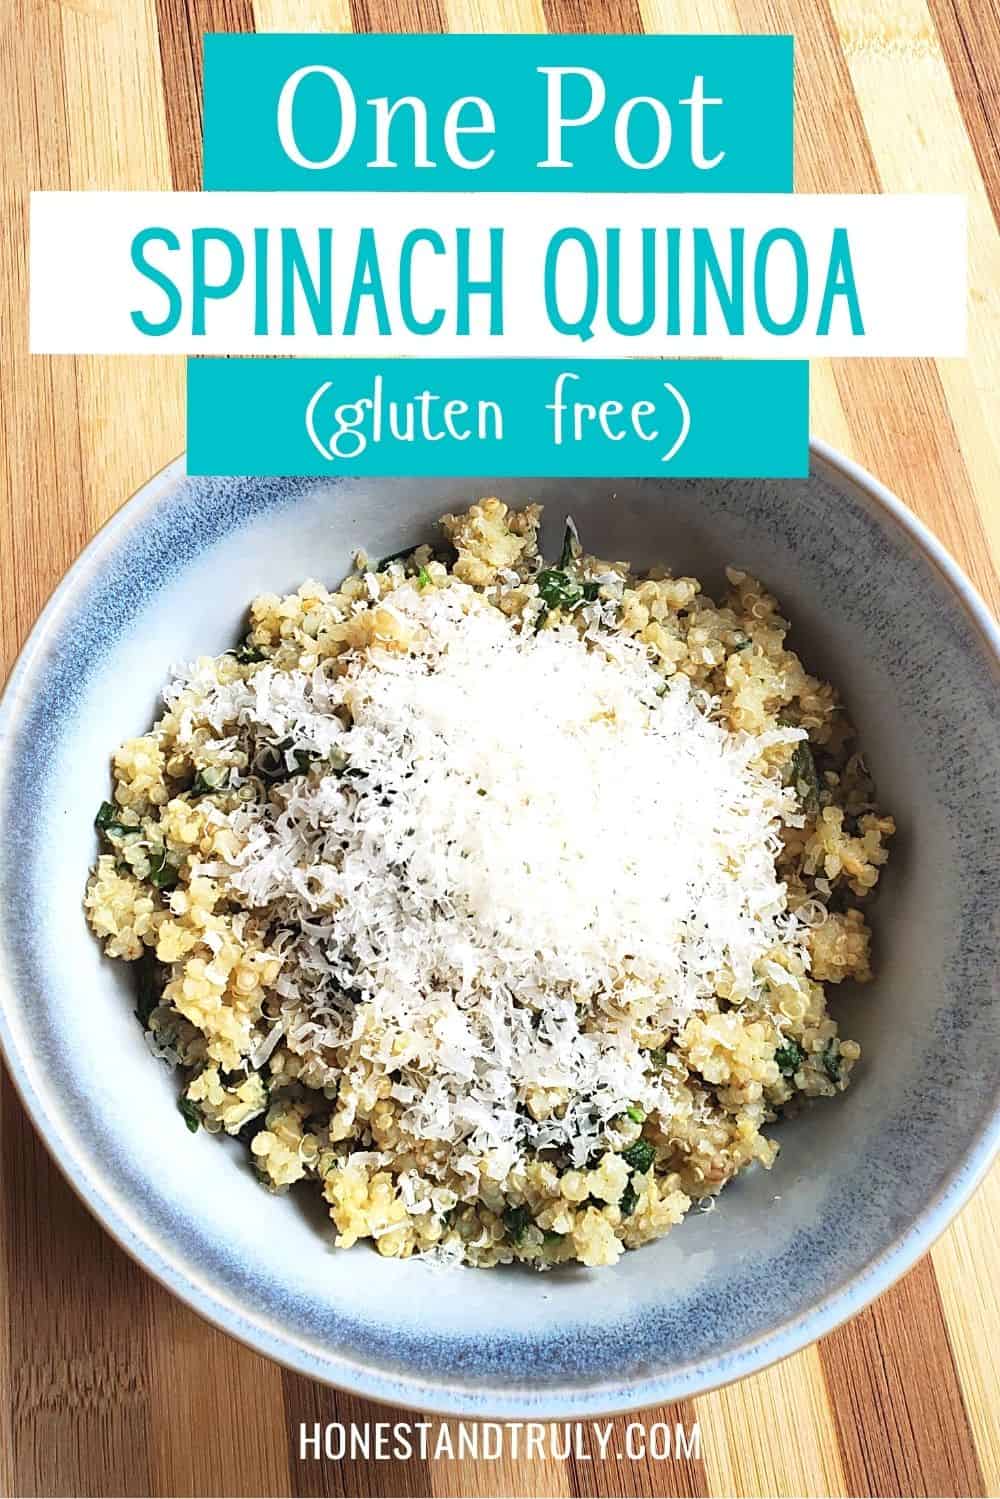 Overhead of a bowl of parmesan quinoa with text one pot spinach quinoa gluten free.